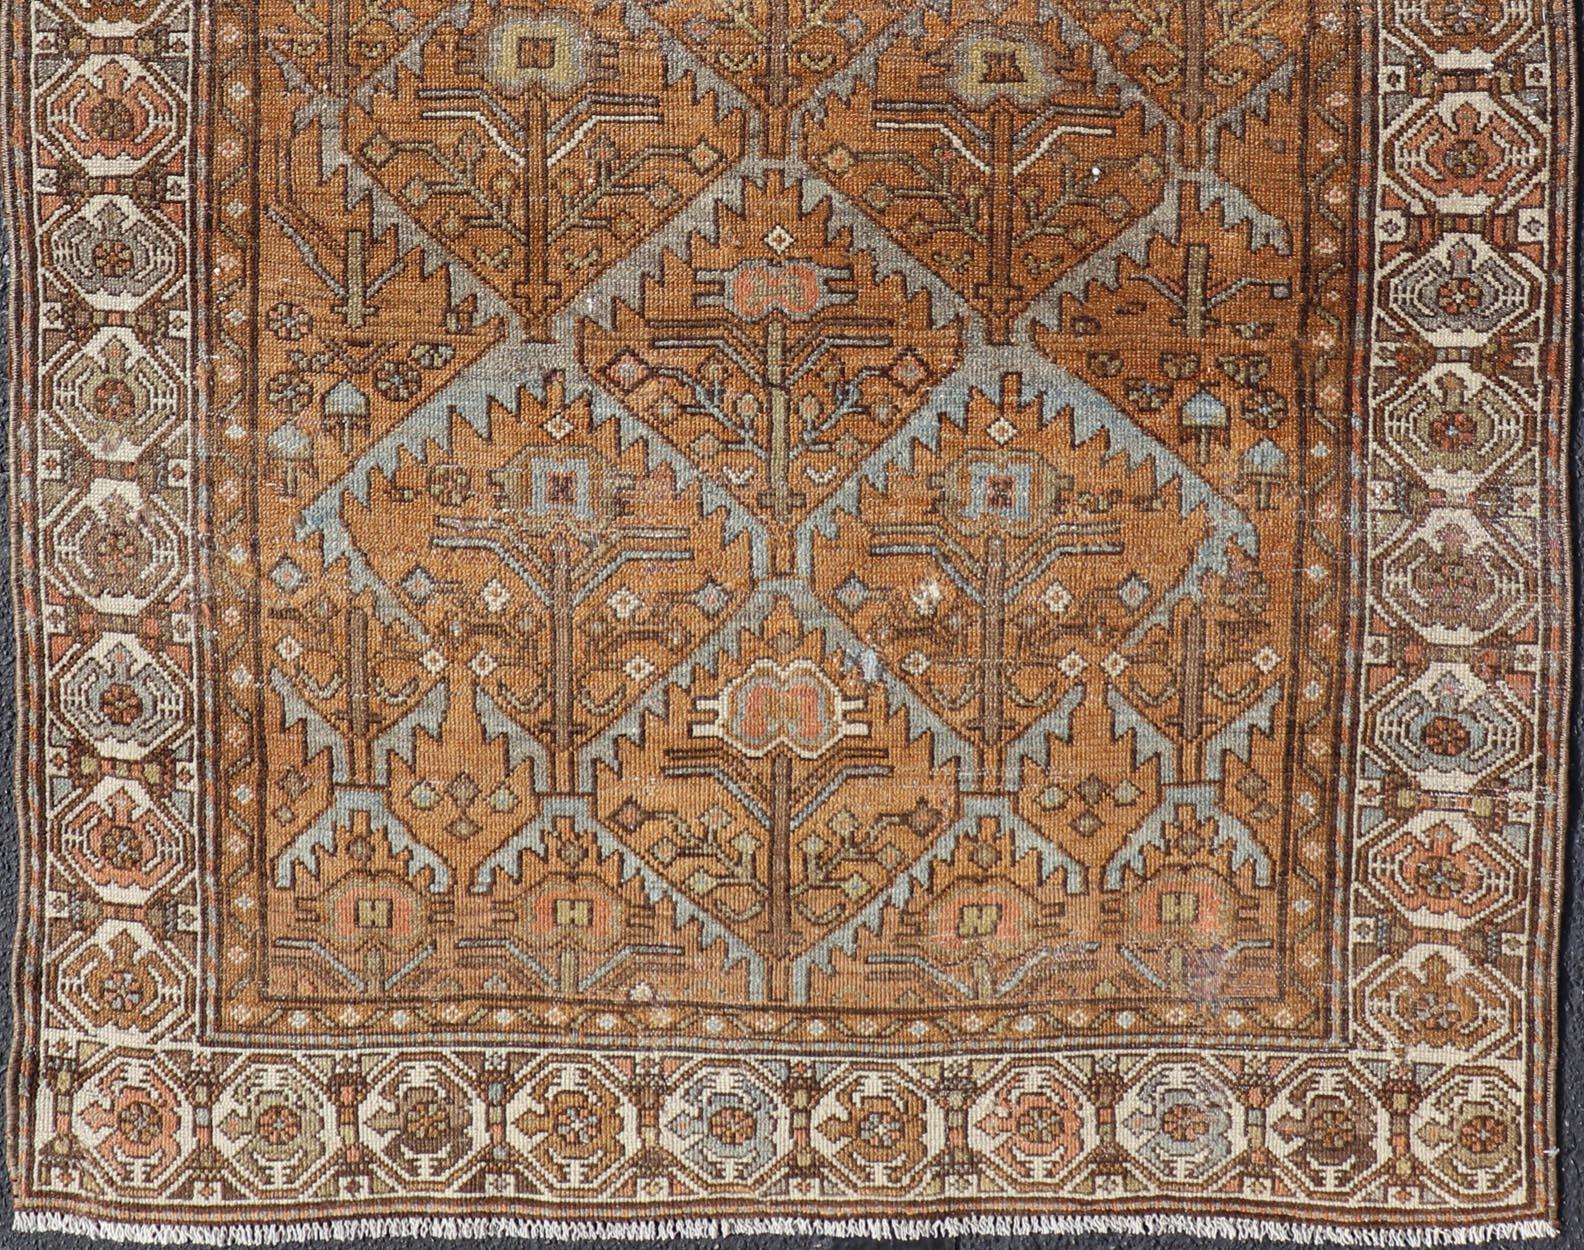 Hand-Knotted Antique Persian Malayer in Rustic Earthy Tones With All-Over Tribal Medallions